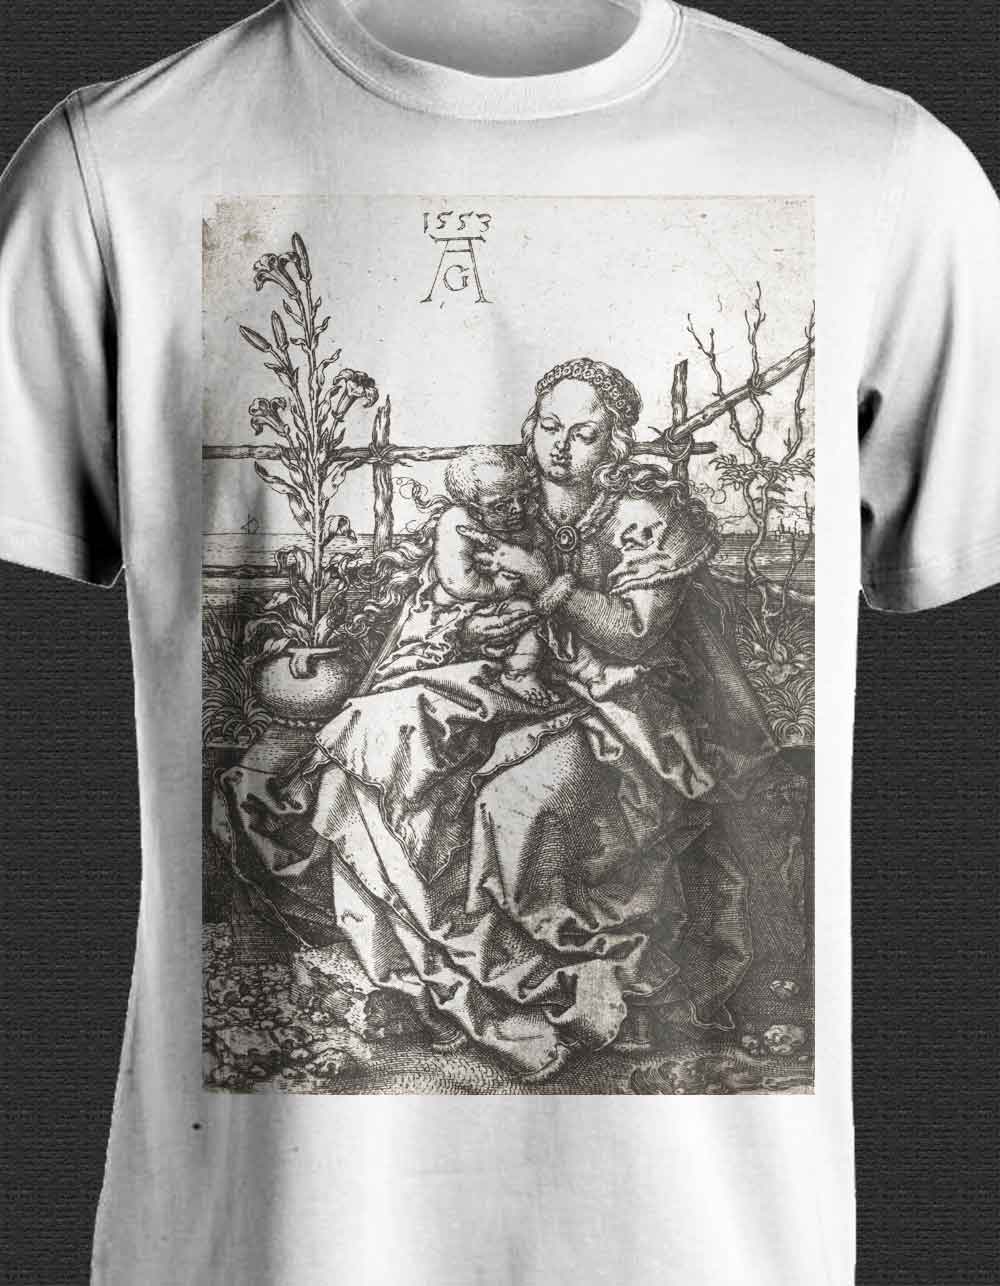 The Virgin and Child on a Grassy Hill shirt